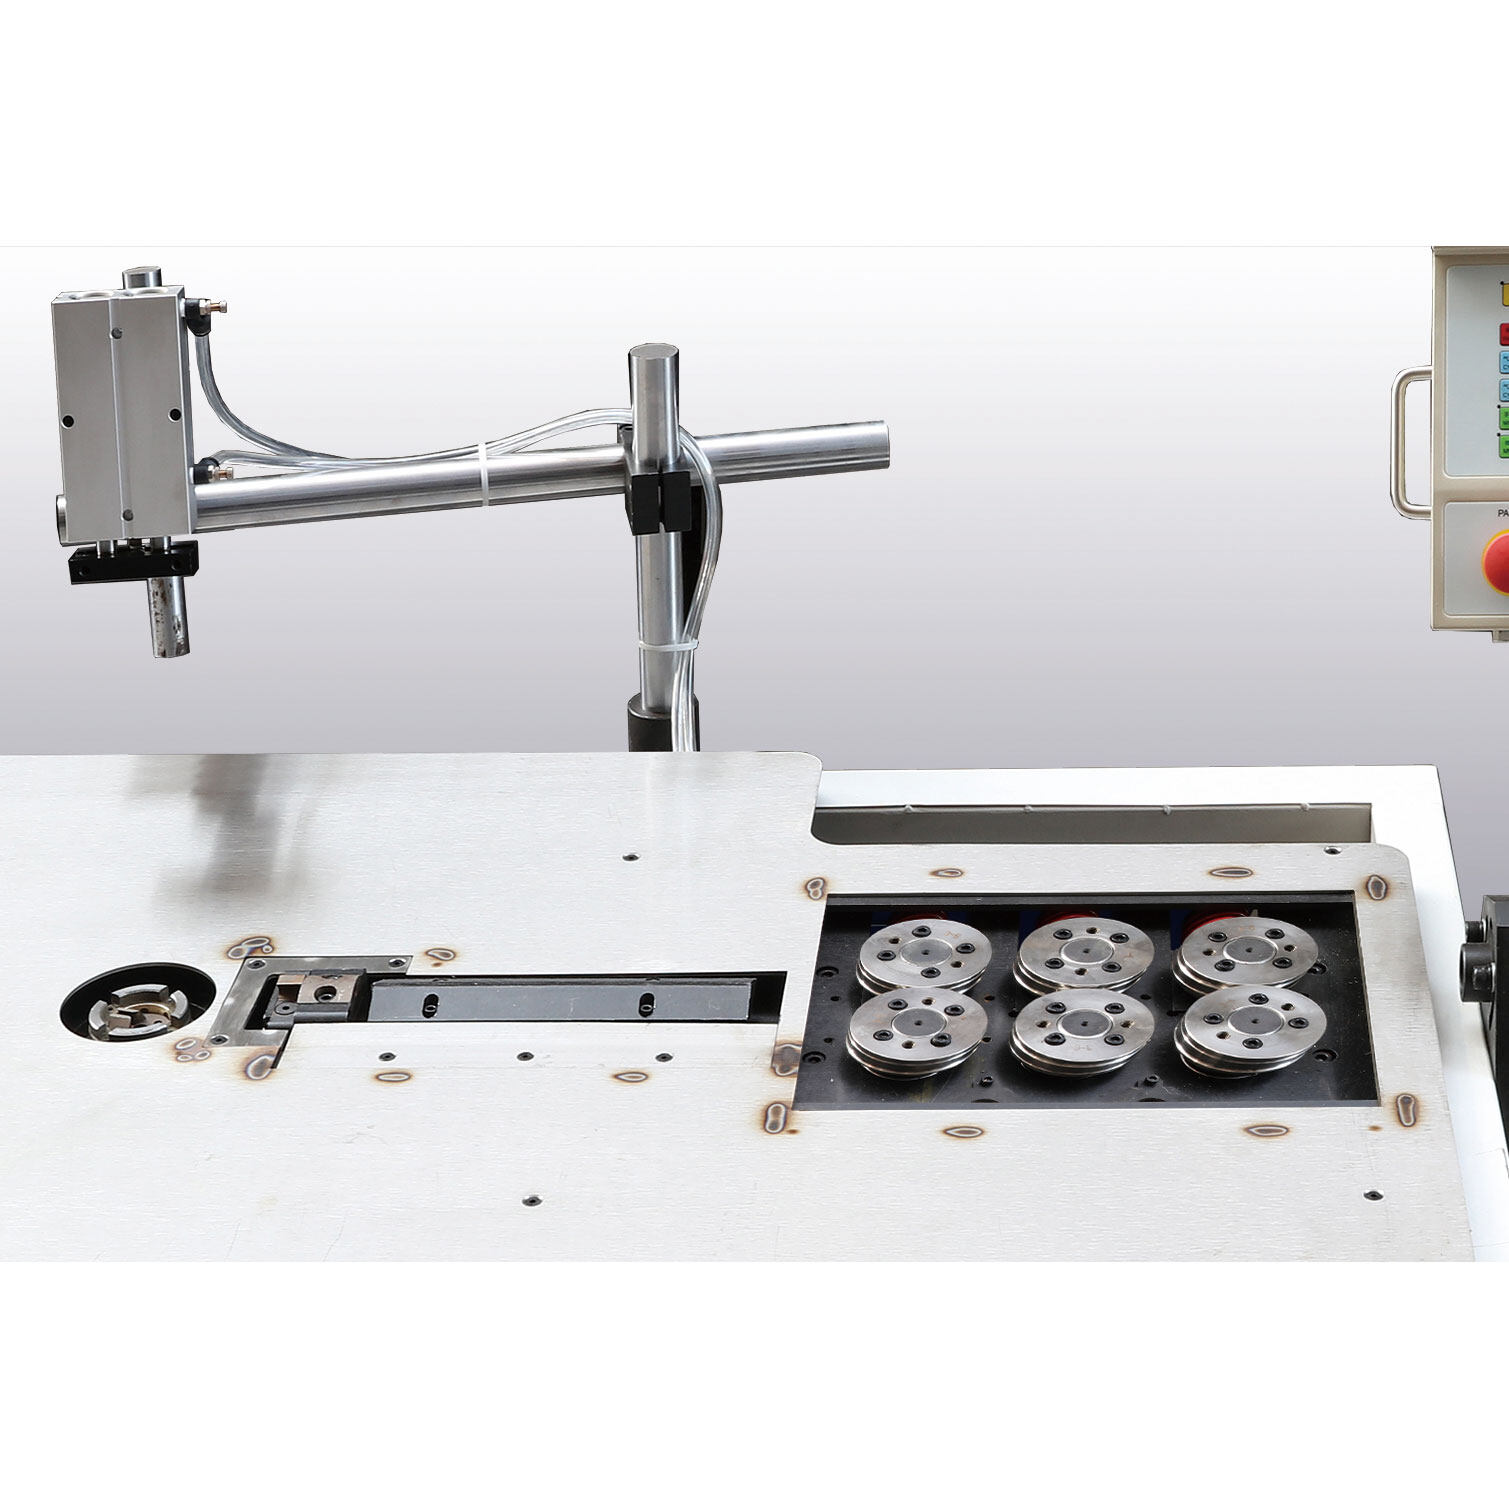 automatic wire bending machine supplier,wire bending machine factory,automatic wire bending machine factory